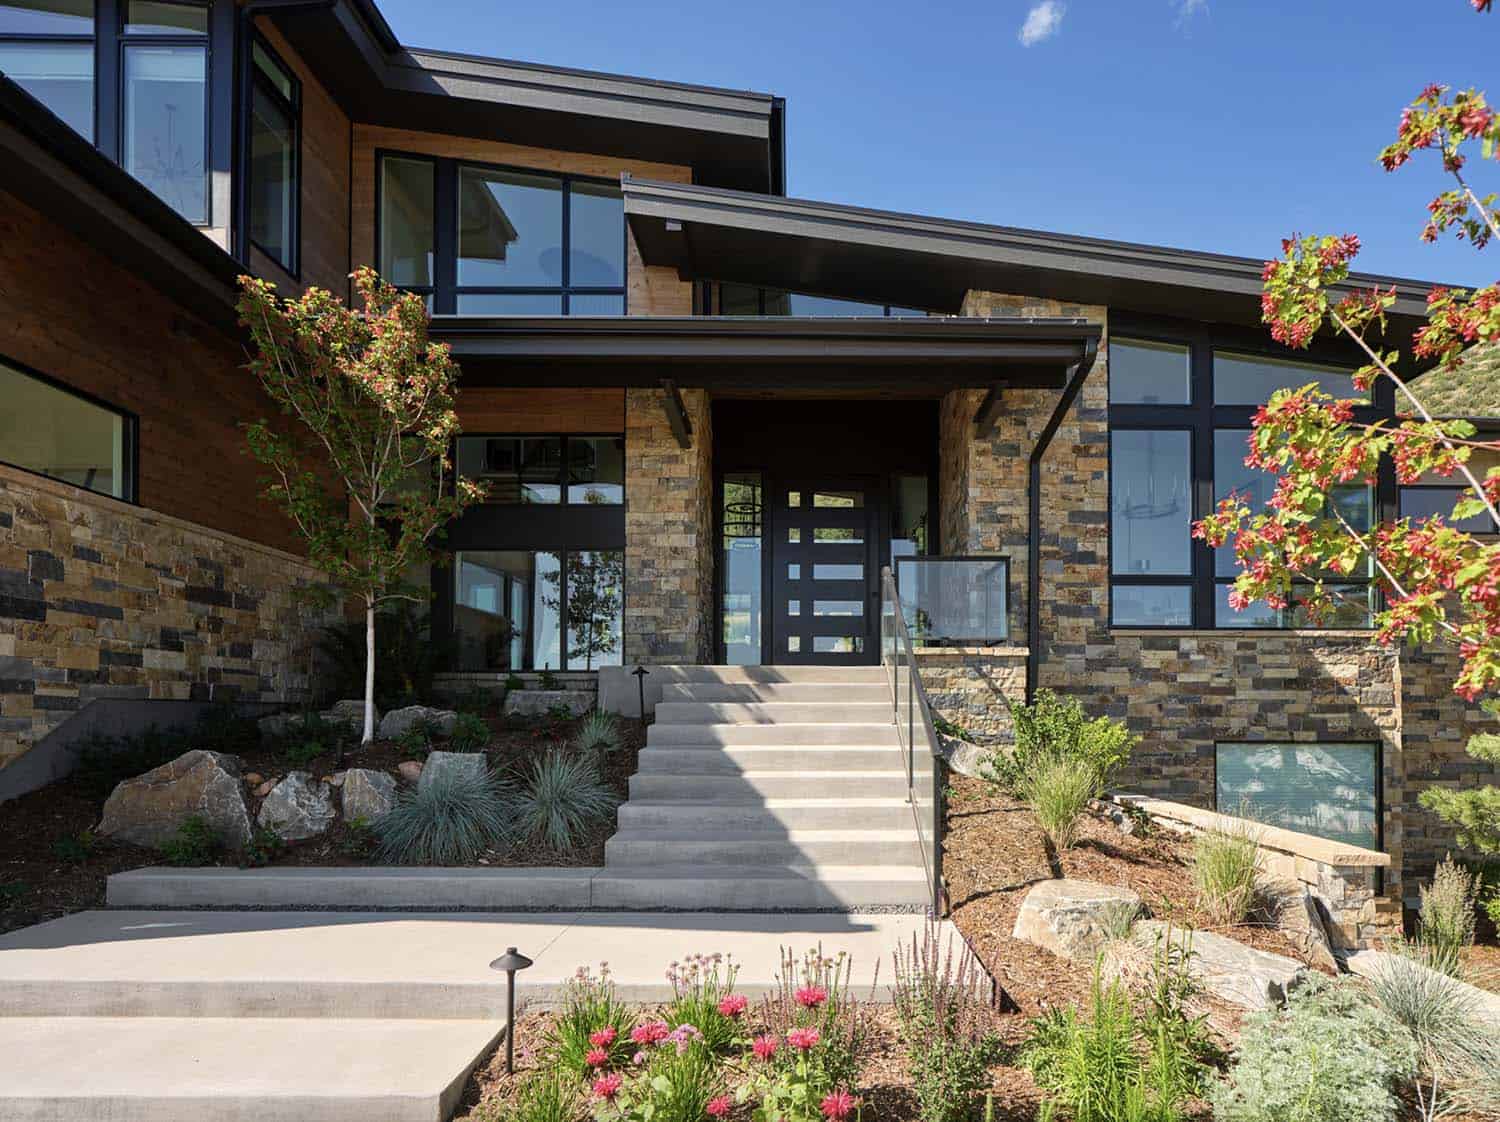 A beautiful and sophisticated home at the base of the Rocky Mountains